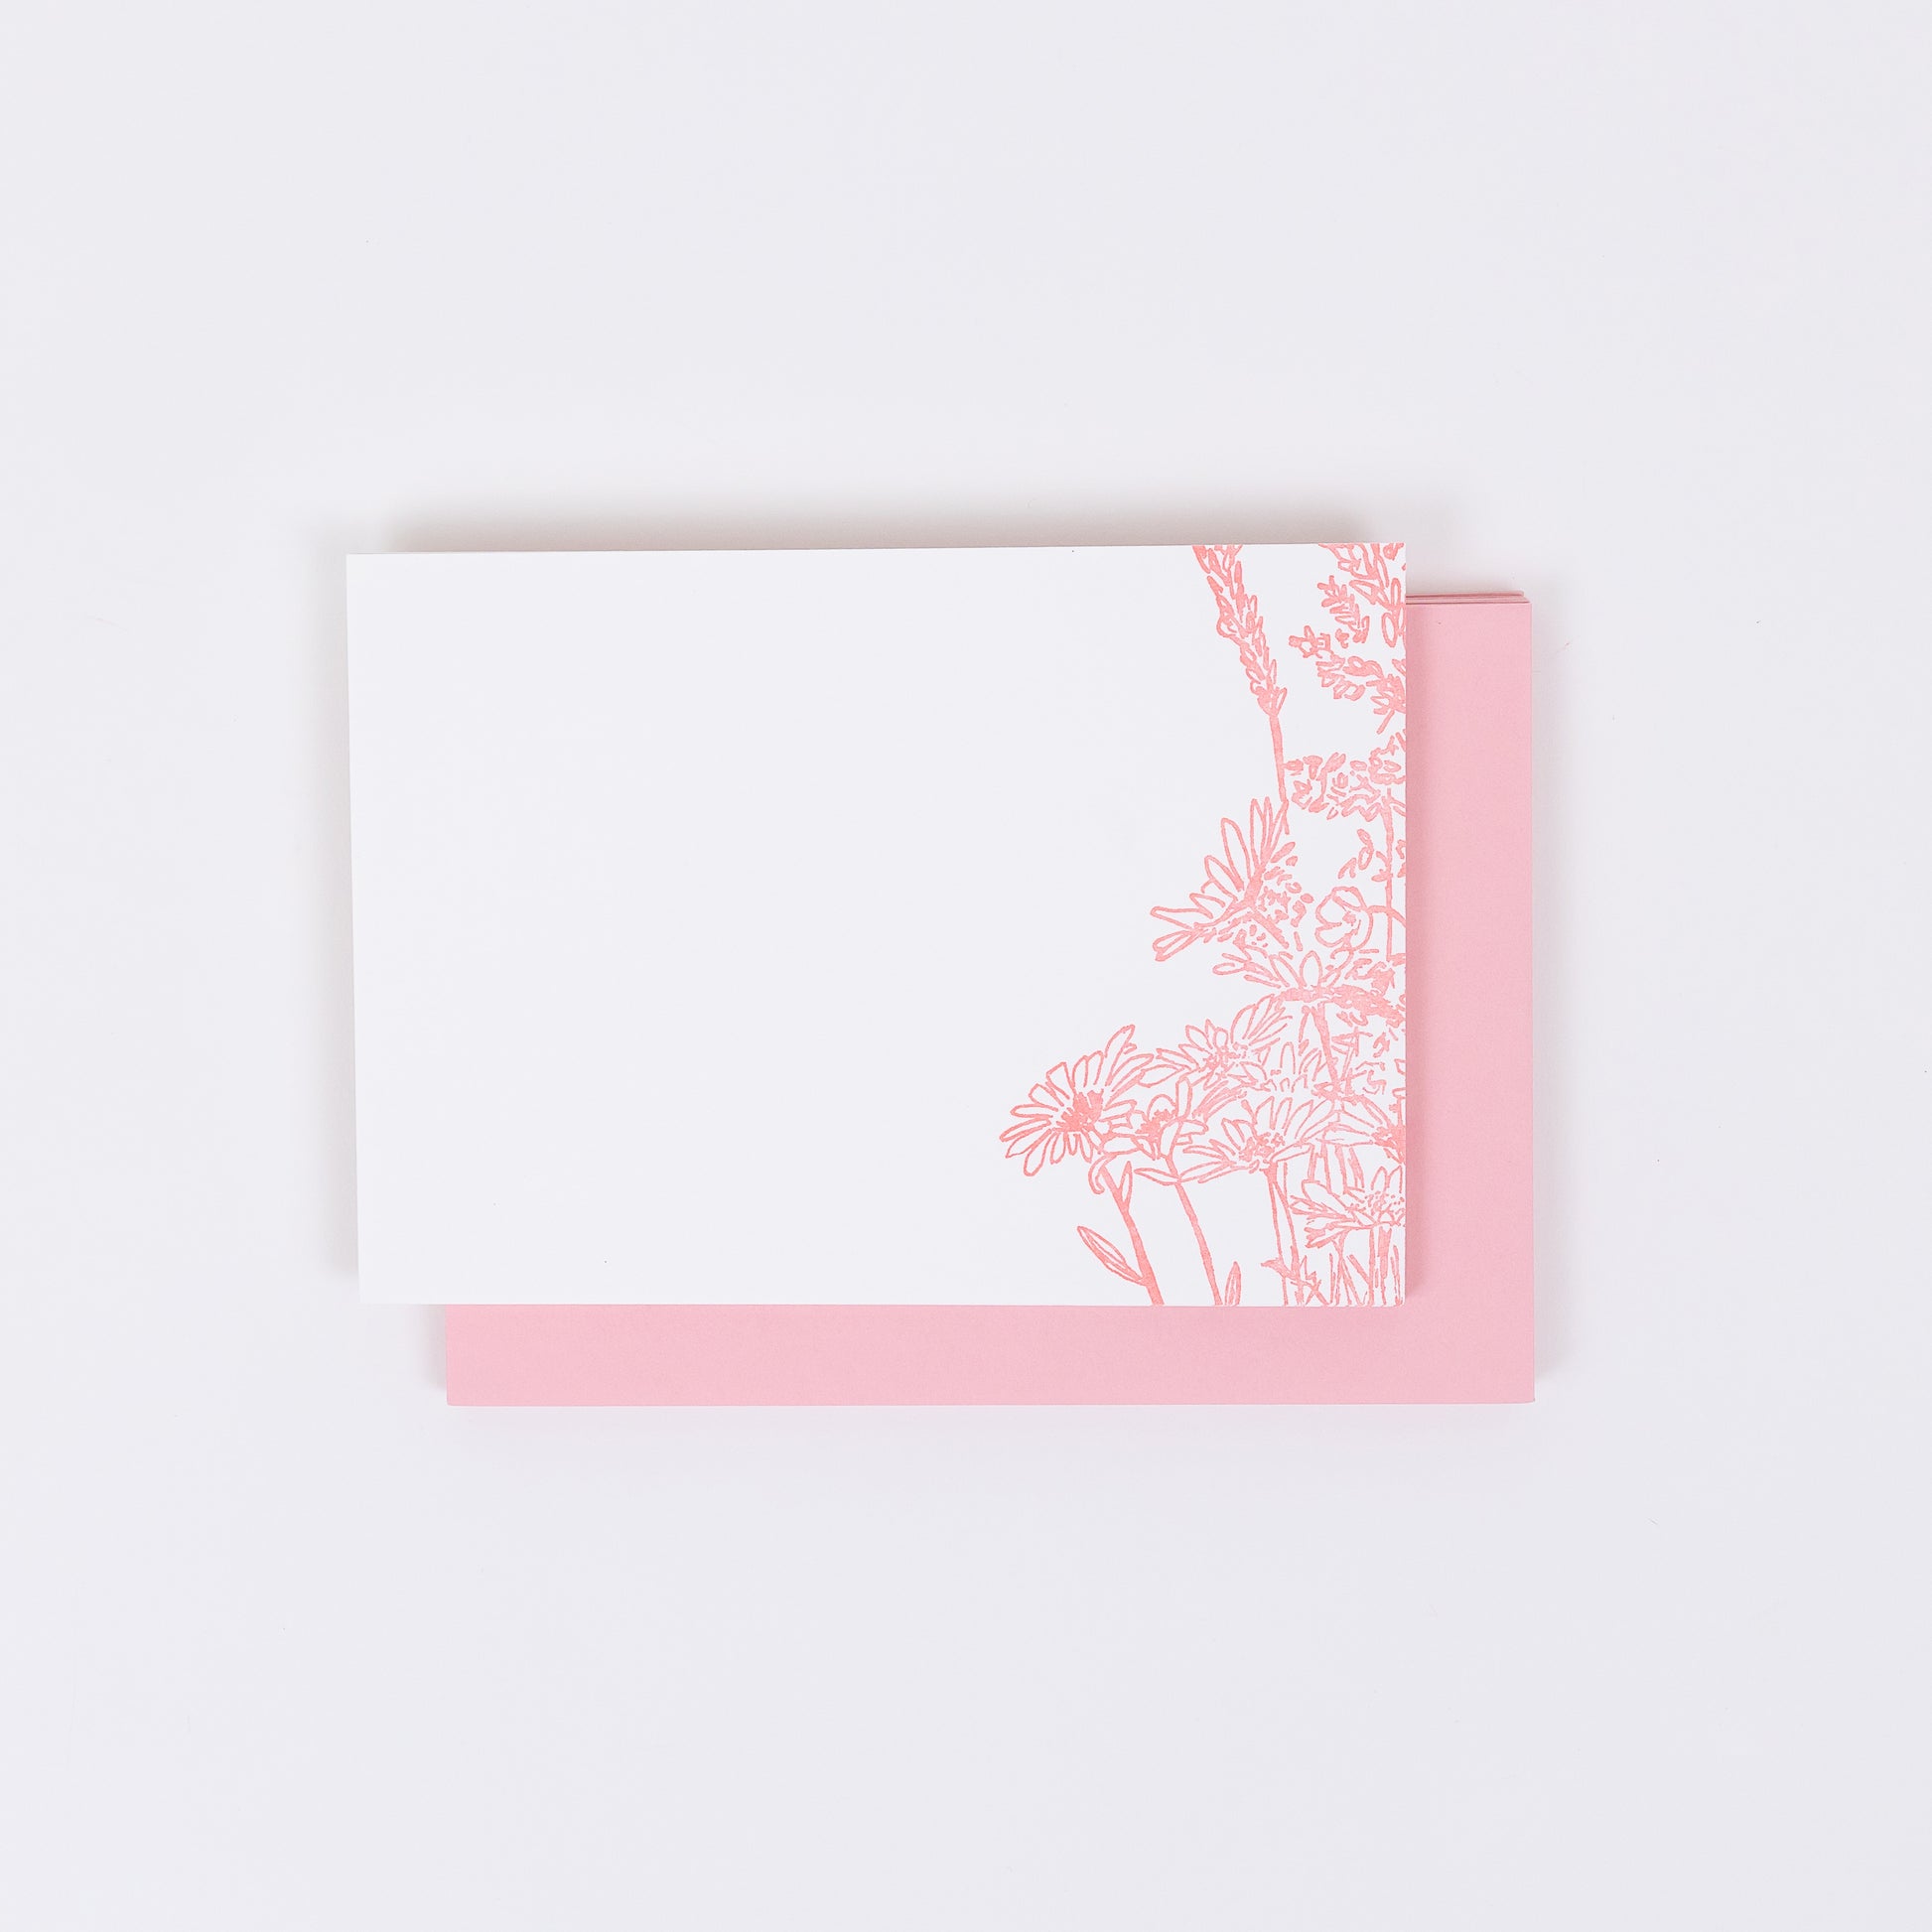 Set of 10 Letterpress Note Cards featuring a hand-drawn Wildflower Bouquet letterpress printed in a soft pink ink onto 100% cotton paper. Includes 10 soft pink envelopes. Size A6.  The cards are stacked on the envelopes shown on a white background.